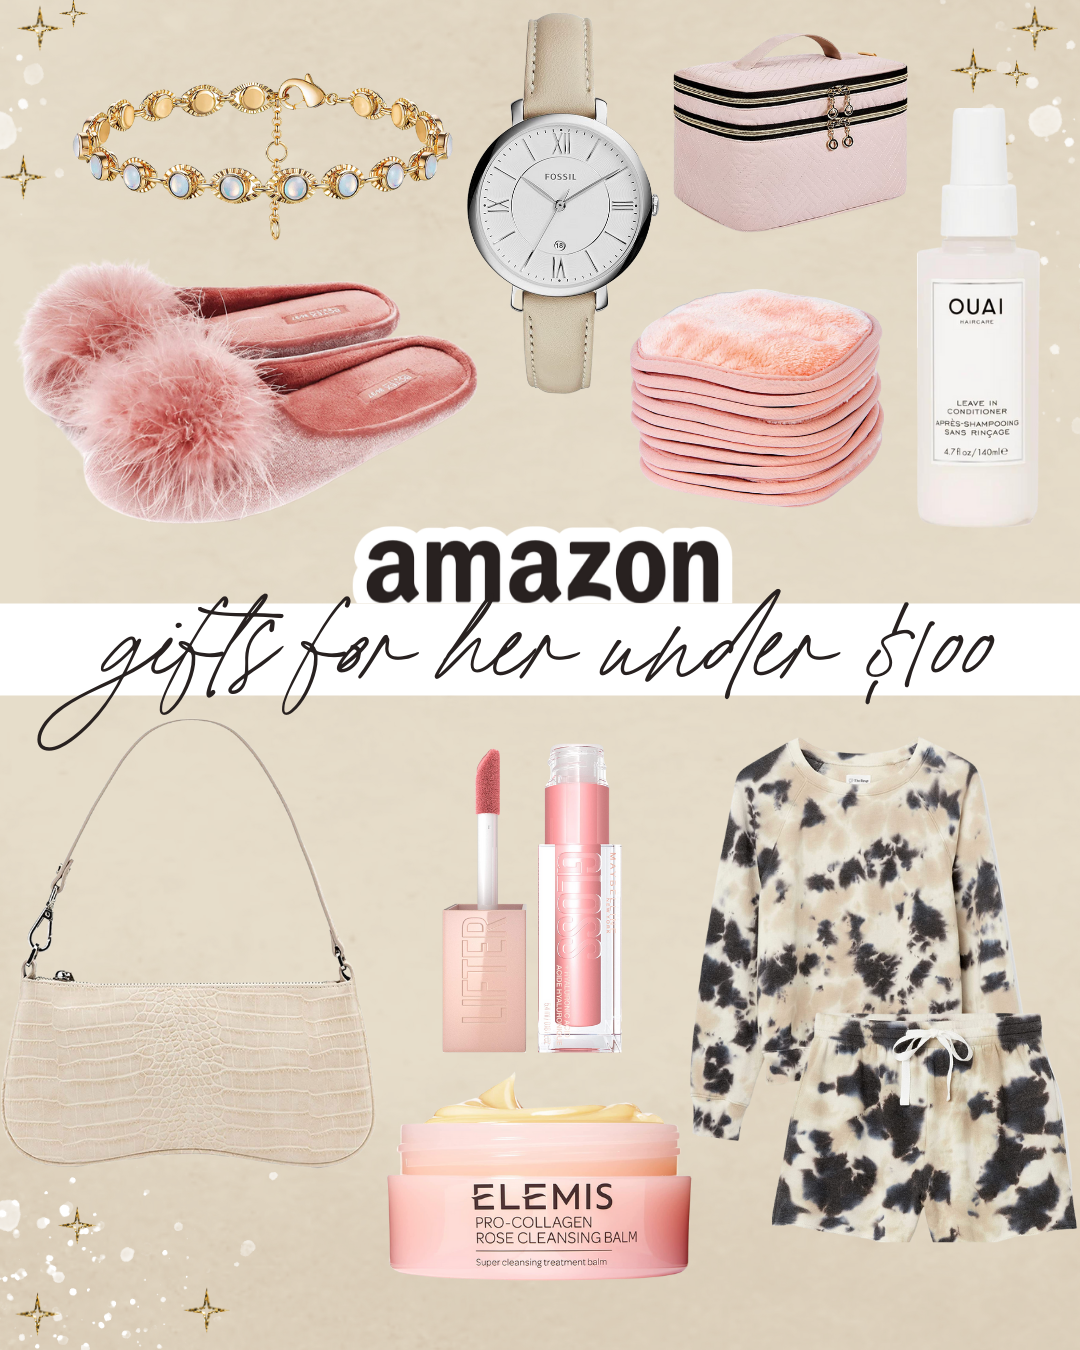 Amazon Gifts for Her Under $100 - Affordable by Amanda